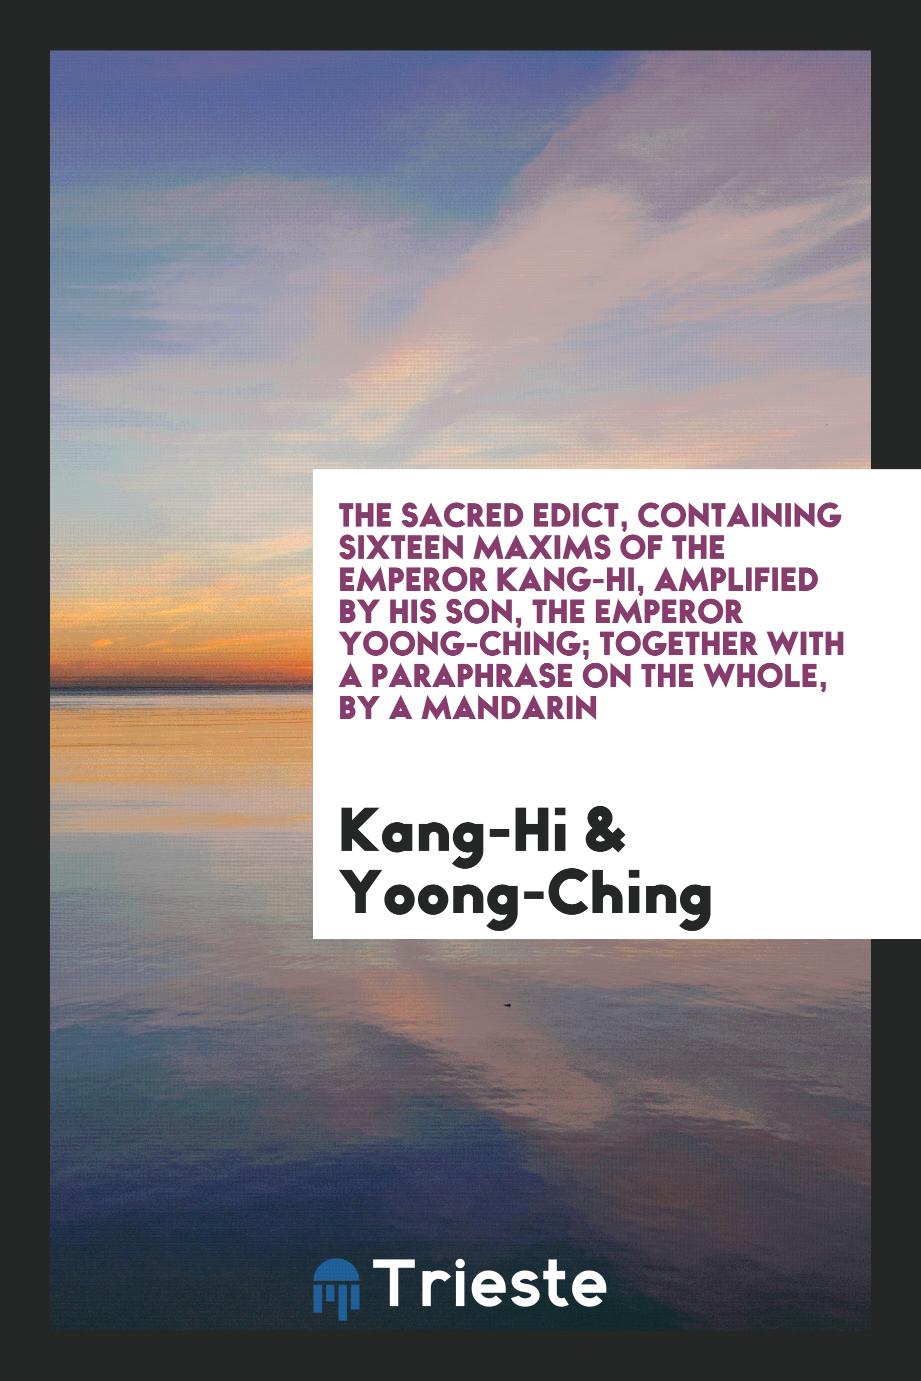 The Sacred Edict, Containing Sixteen Maxims of the Emperor Kang-Hi, Amplified by His Son, the Emperor Yoong-Ching; Together with a Paraphrase on the Whole, by a Mandarin